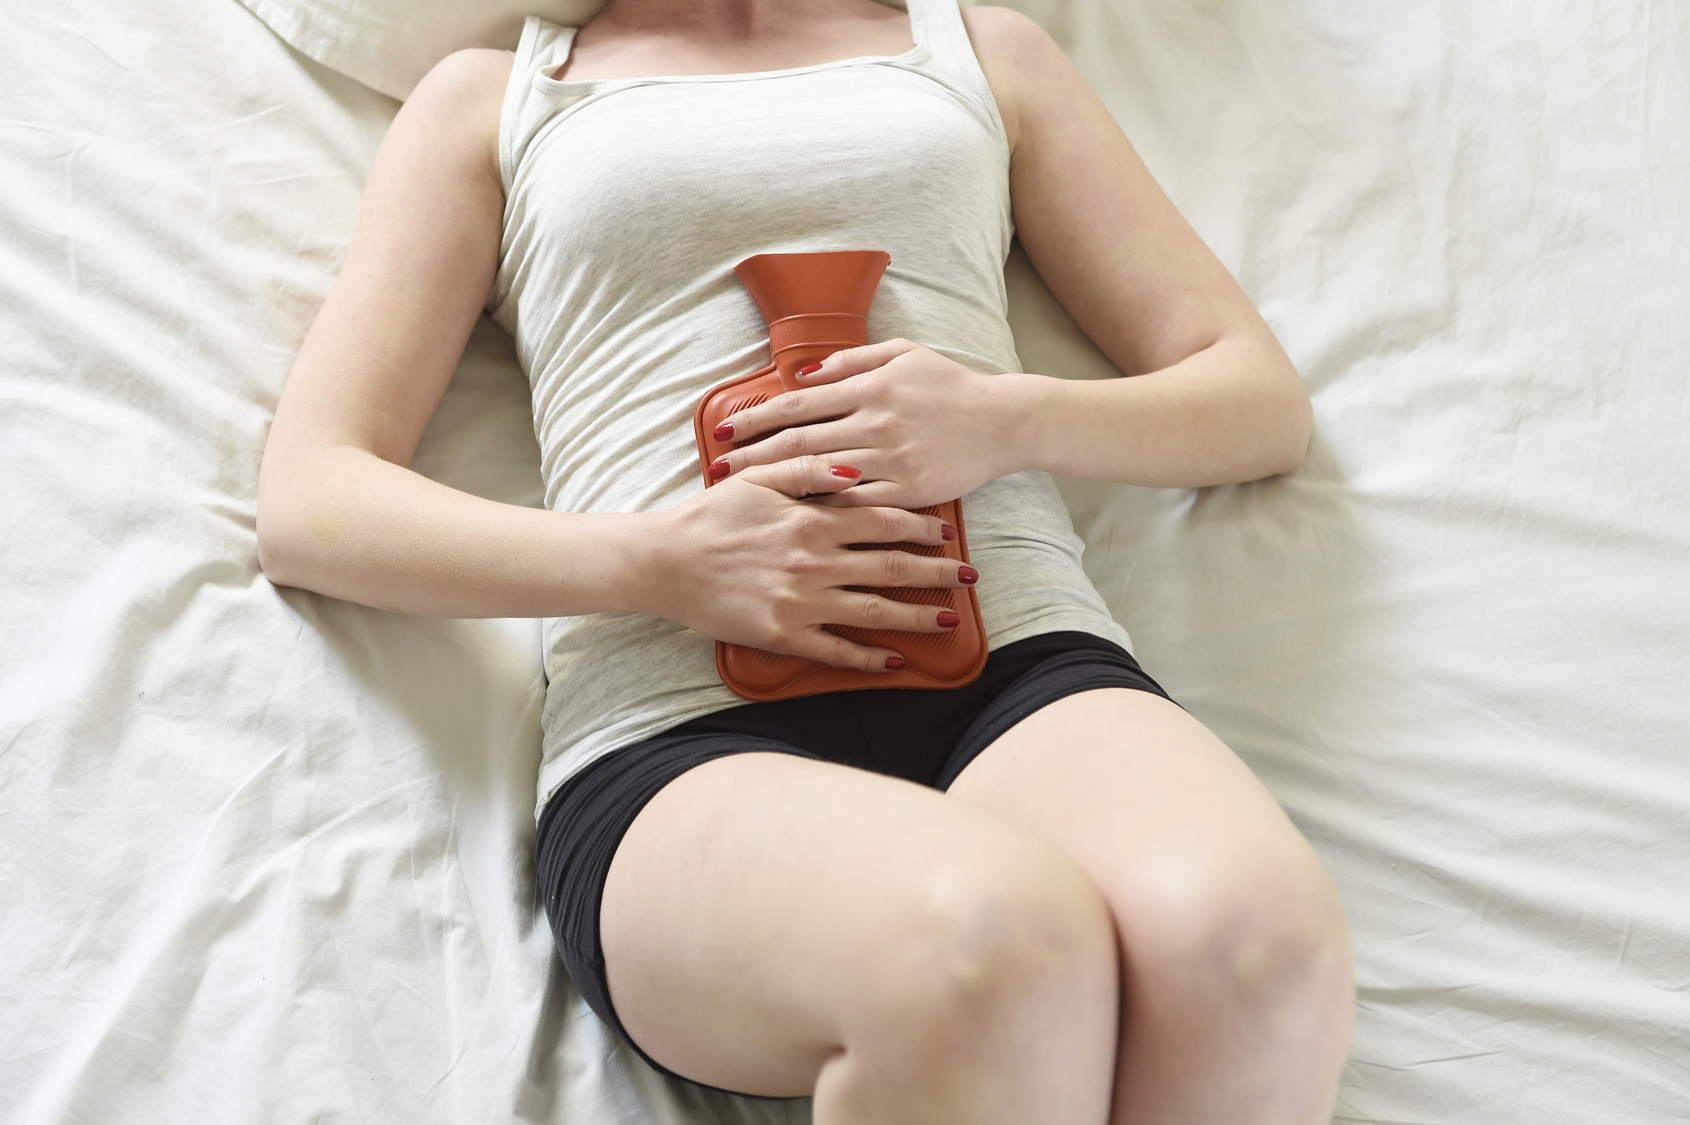 young woman suffering stomach cramps on belly holding hot water bottle against tummy